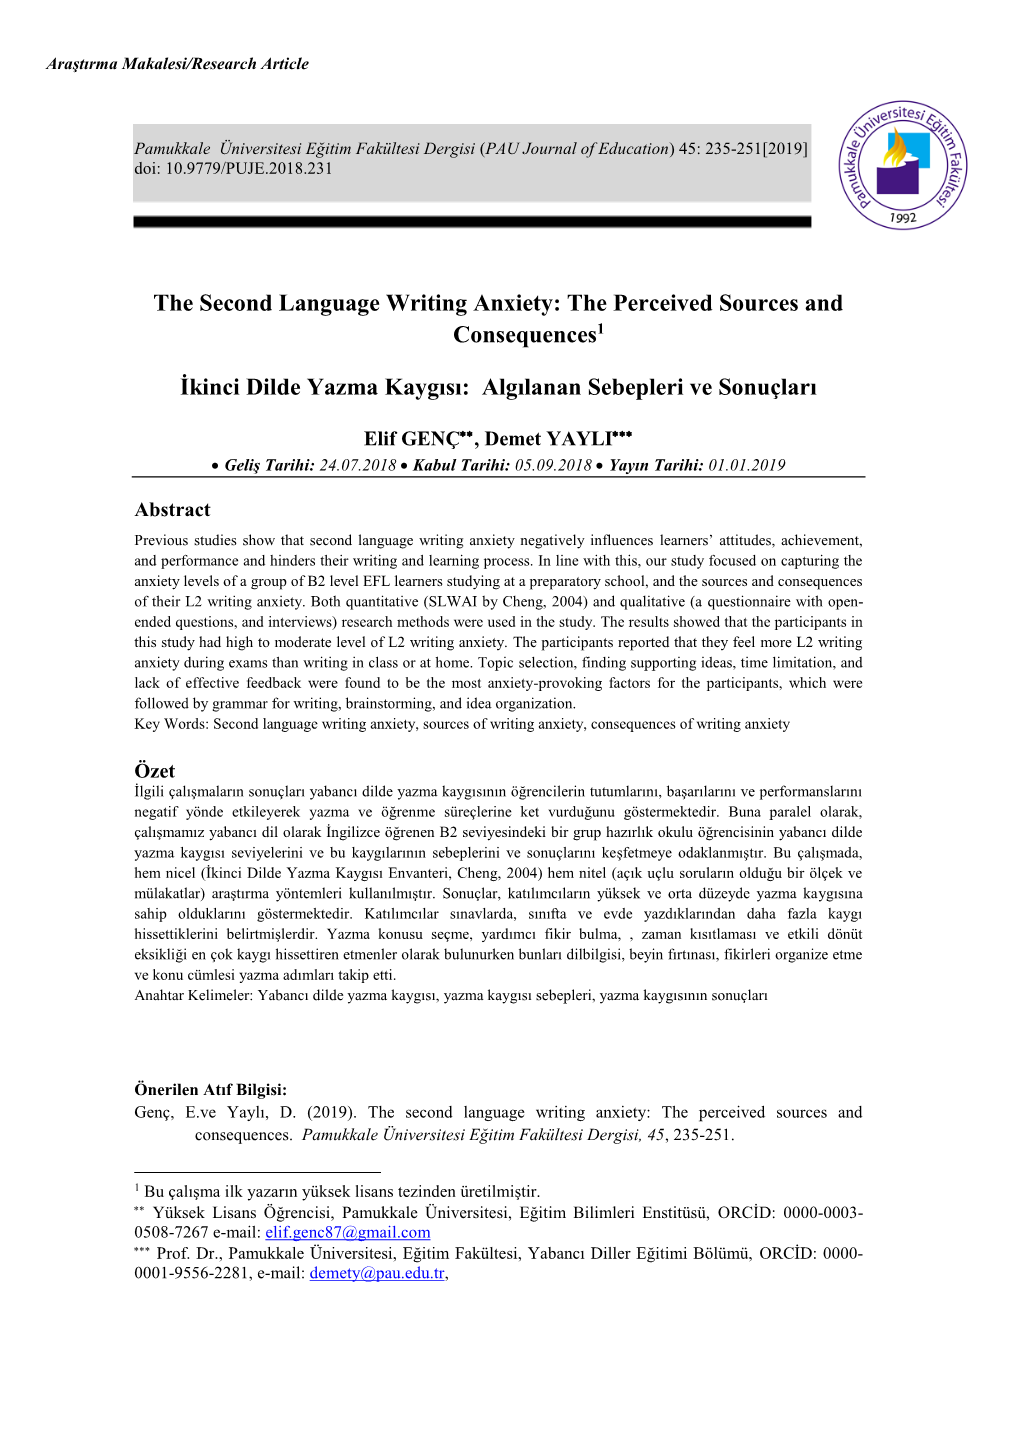 The Second Language Writing Anxiety: the Perceived Sources and Consequences1